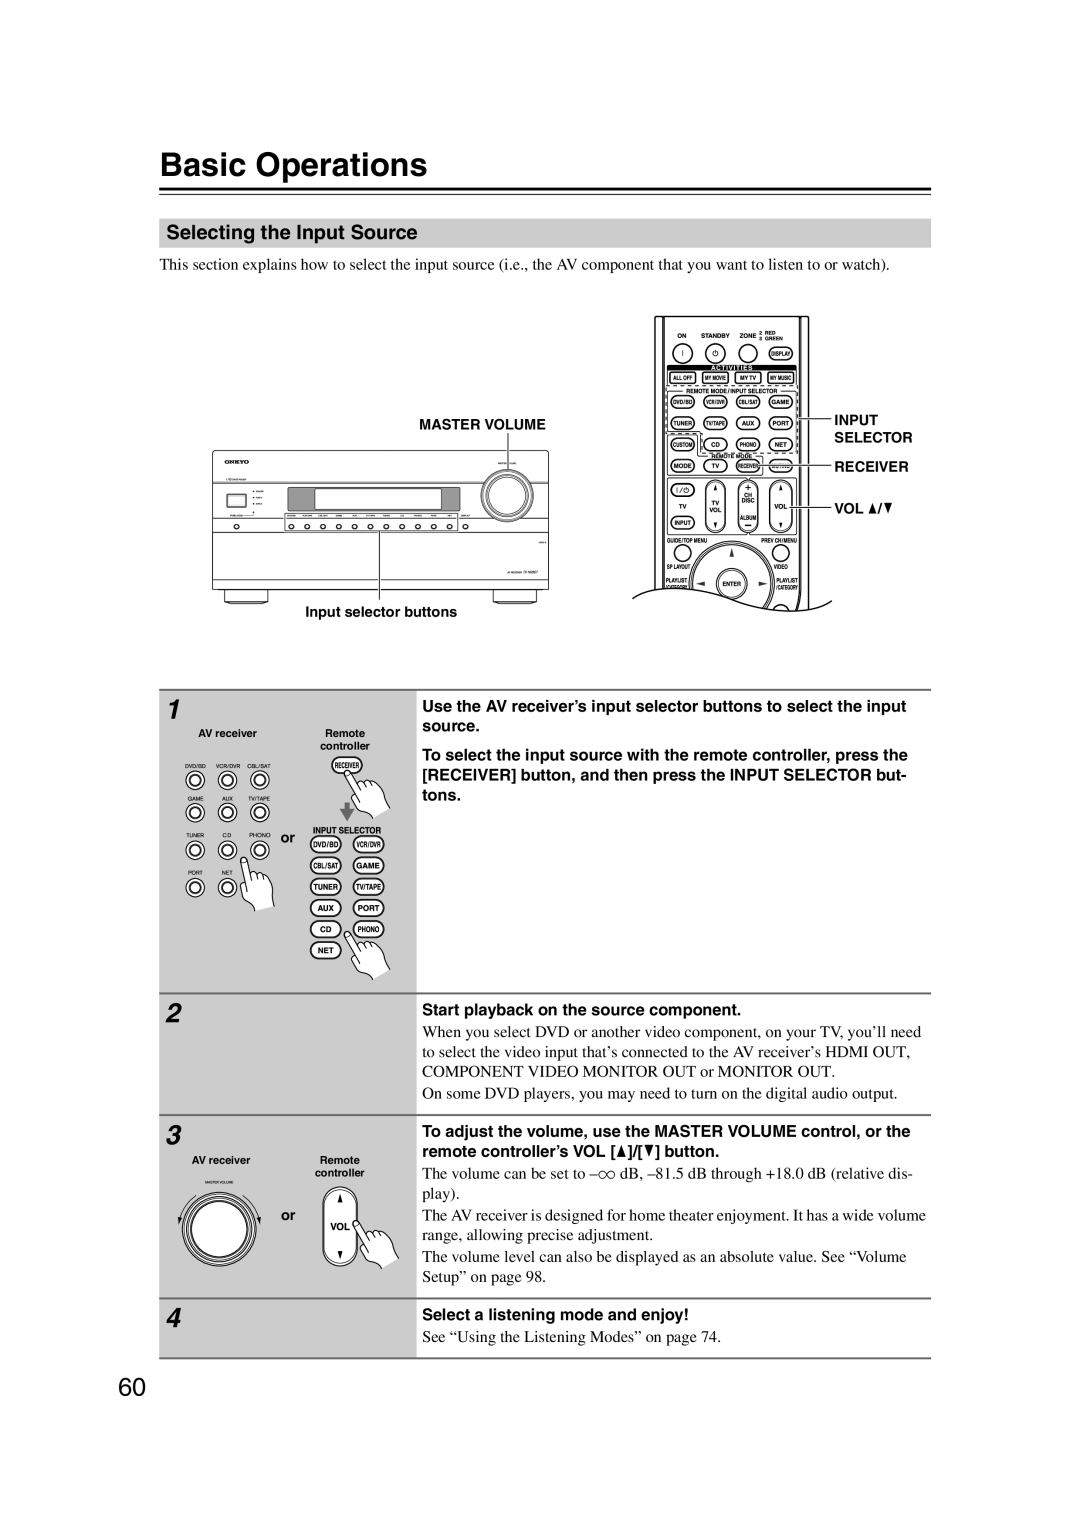 Onkyo 29400021, HT-RC180, TX-NR807 instruction manual Basic Operations, Selecting the Input Source 